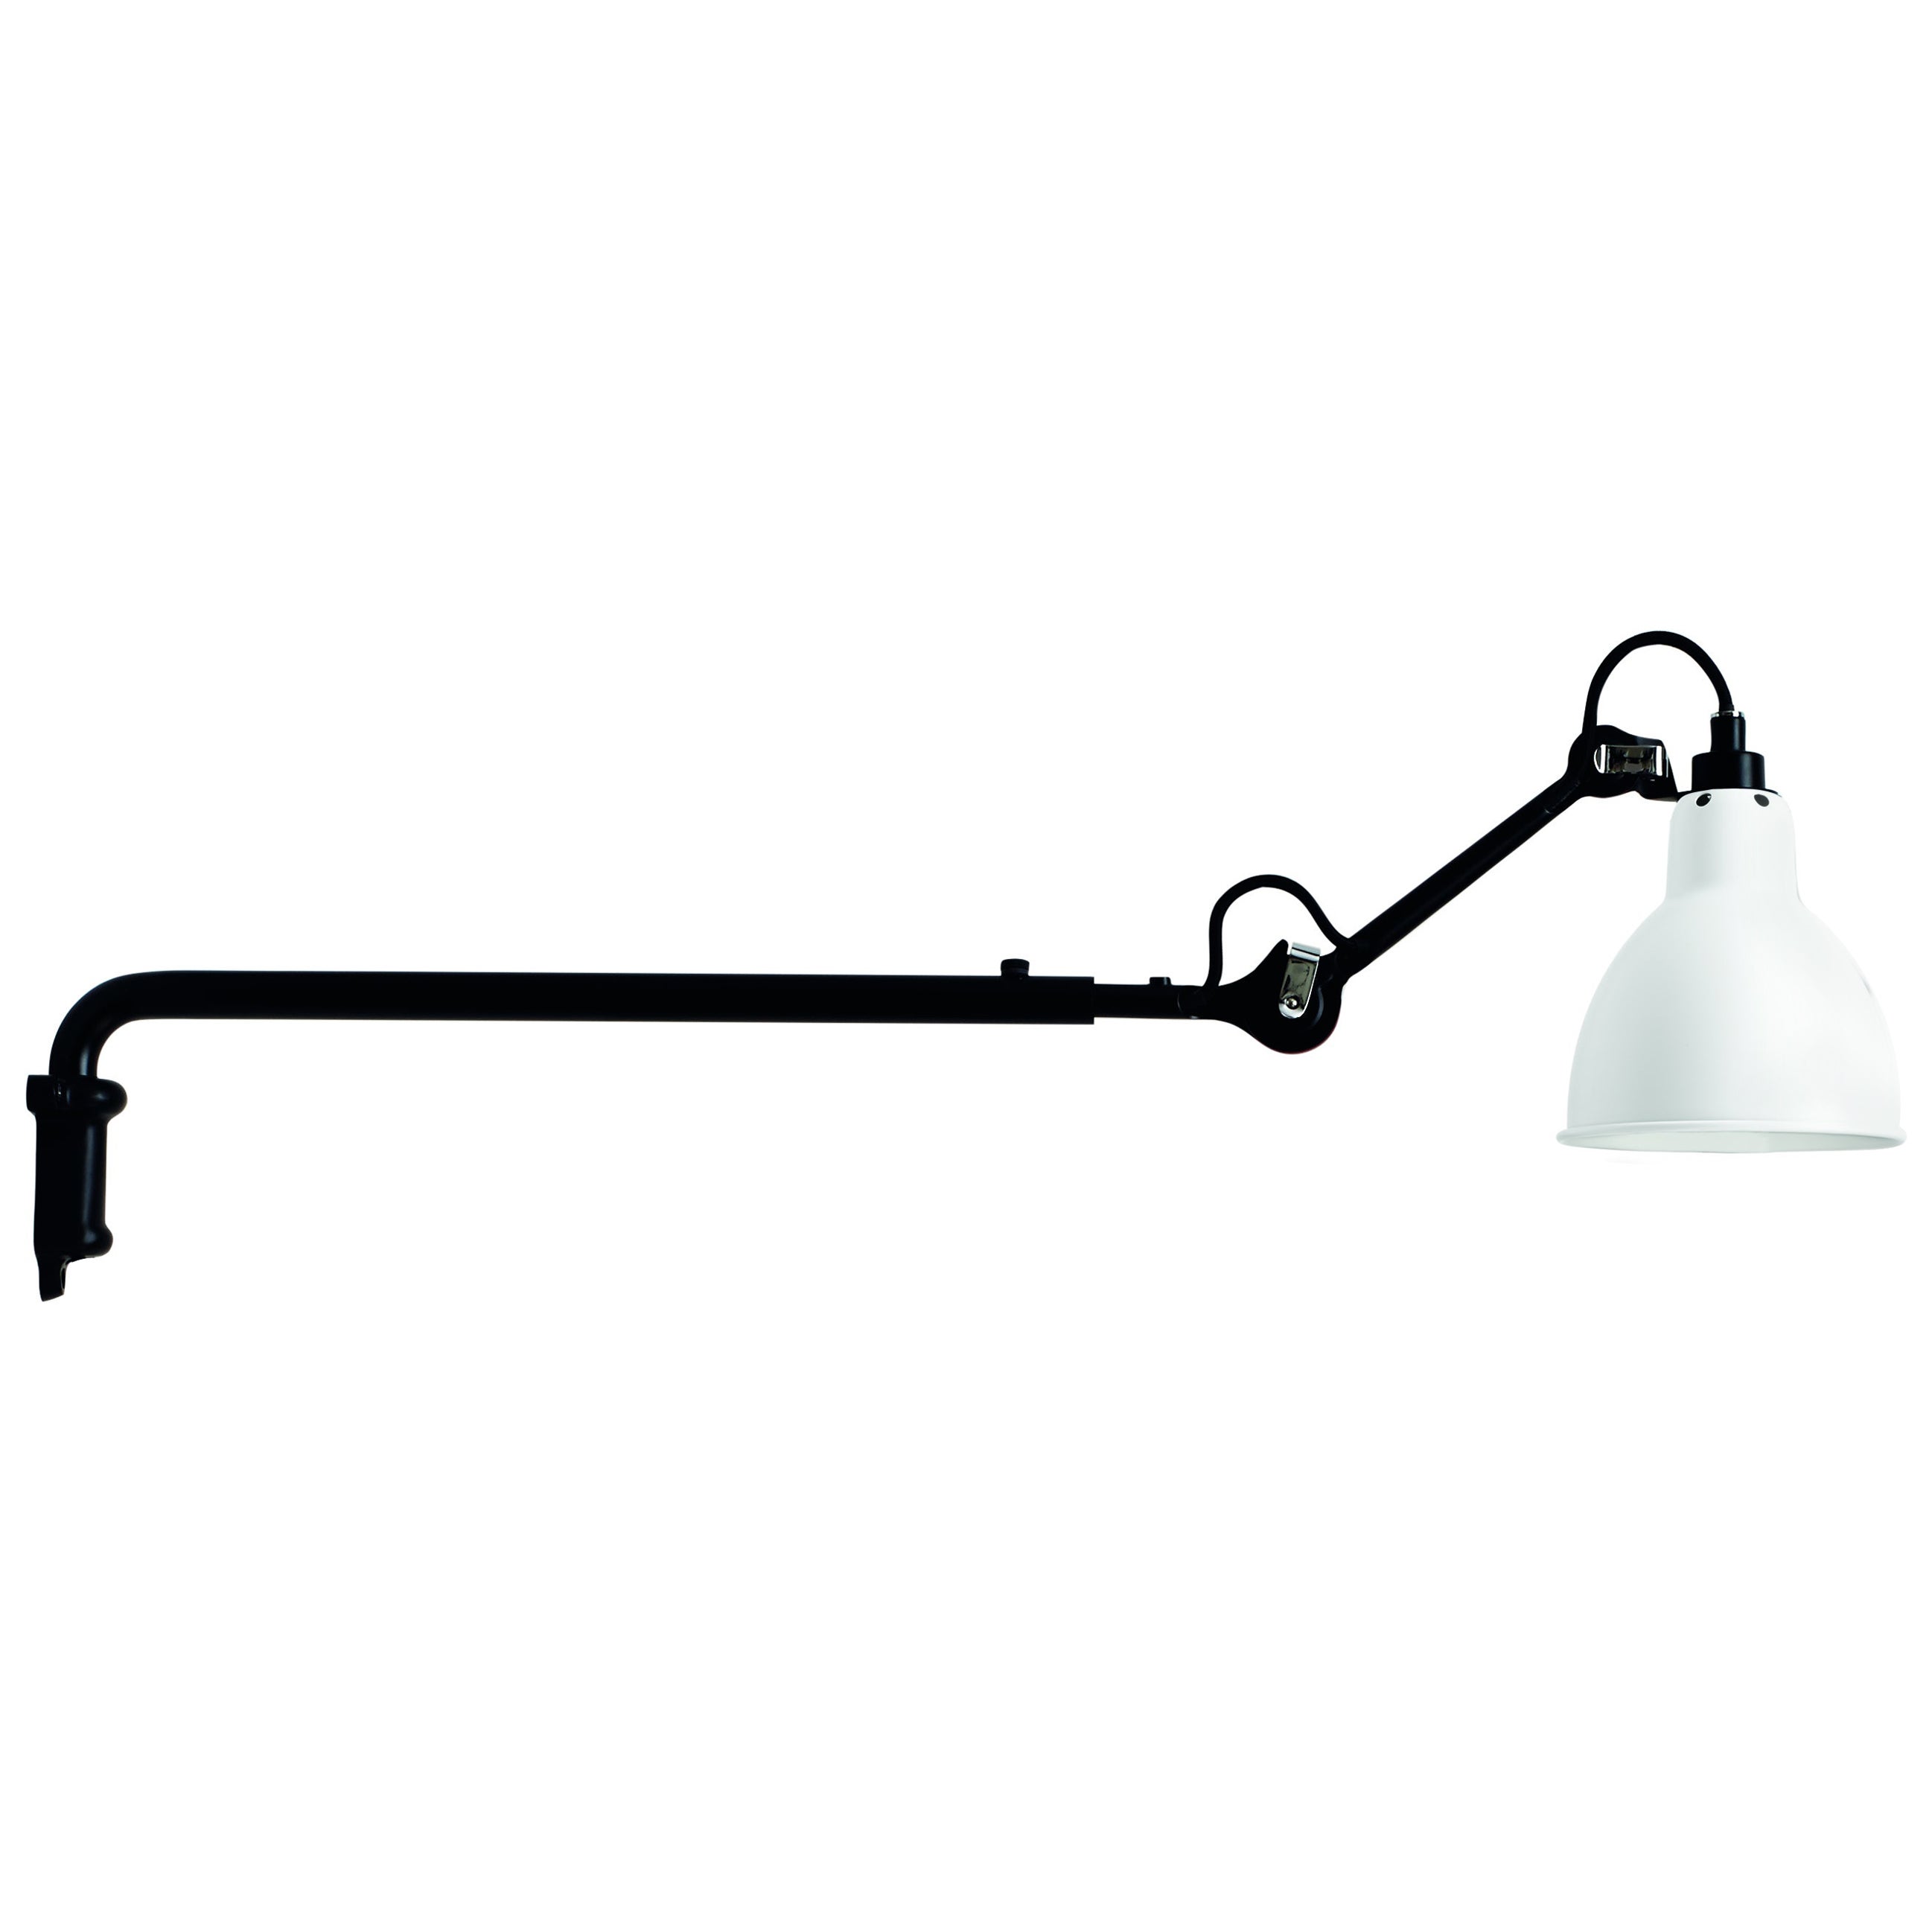 DCW Editions La Lampe Gras N°203 Wall Lamp in Black Steel Arm and White Shade For Sale